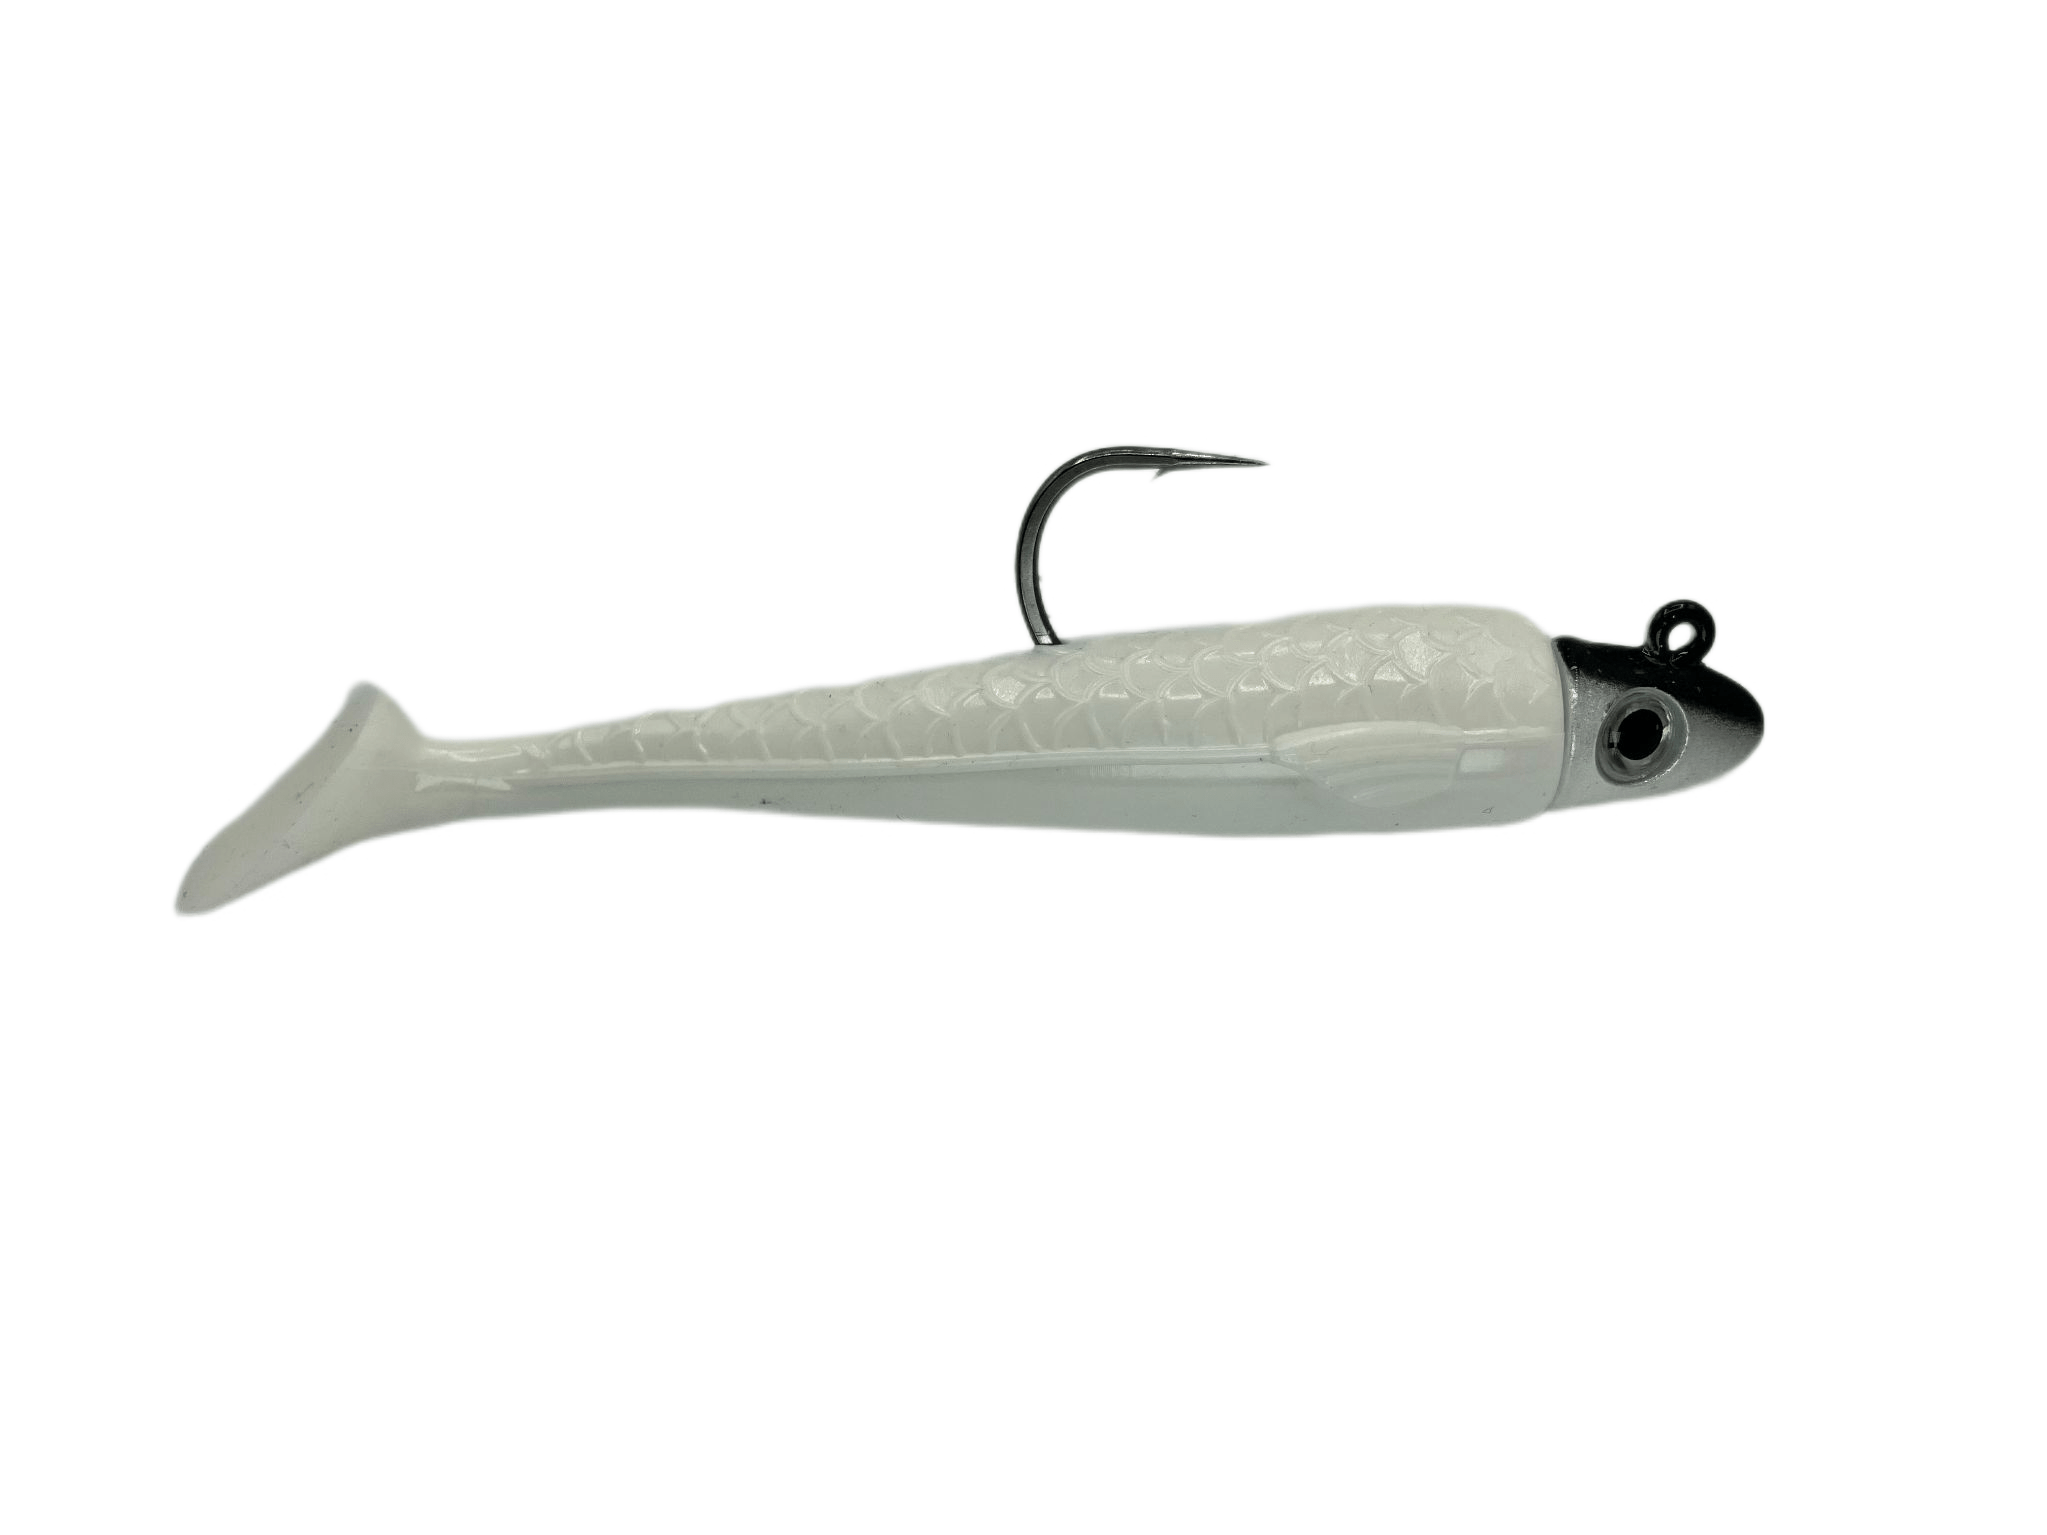 Big Game Series Rigged - RonZ Lures